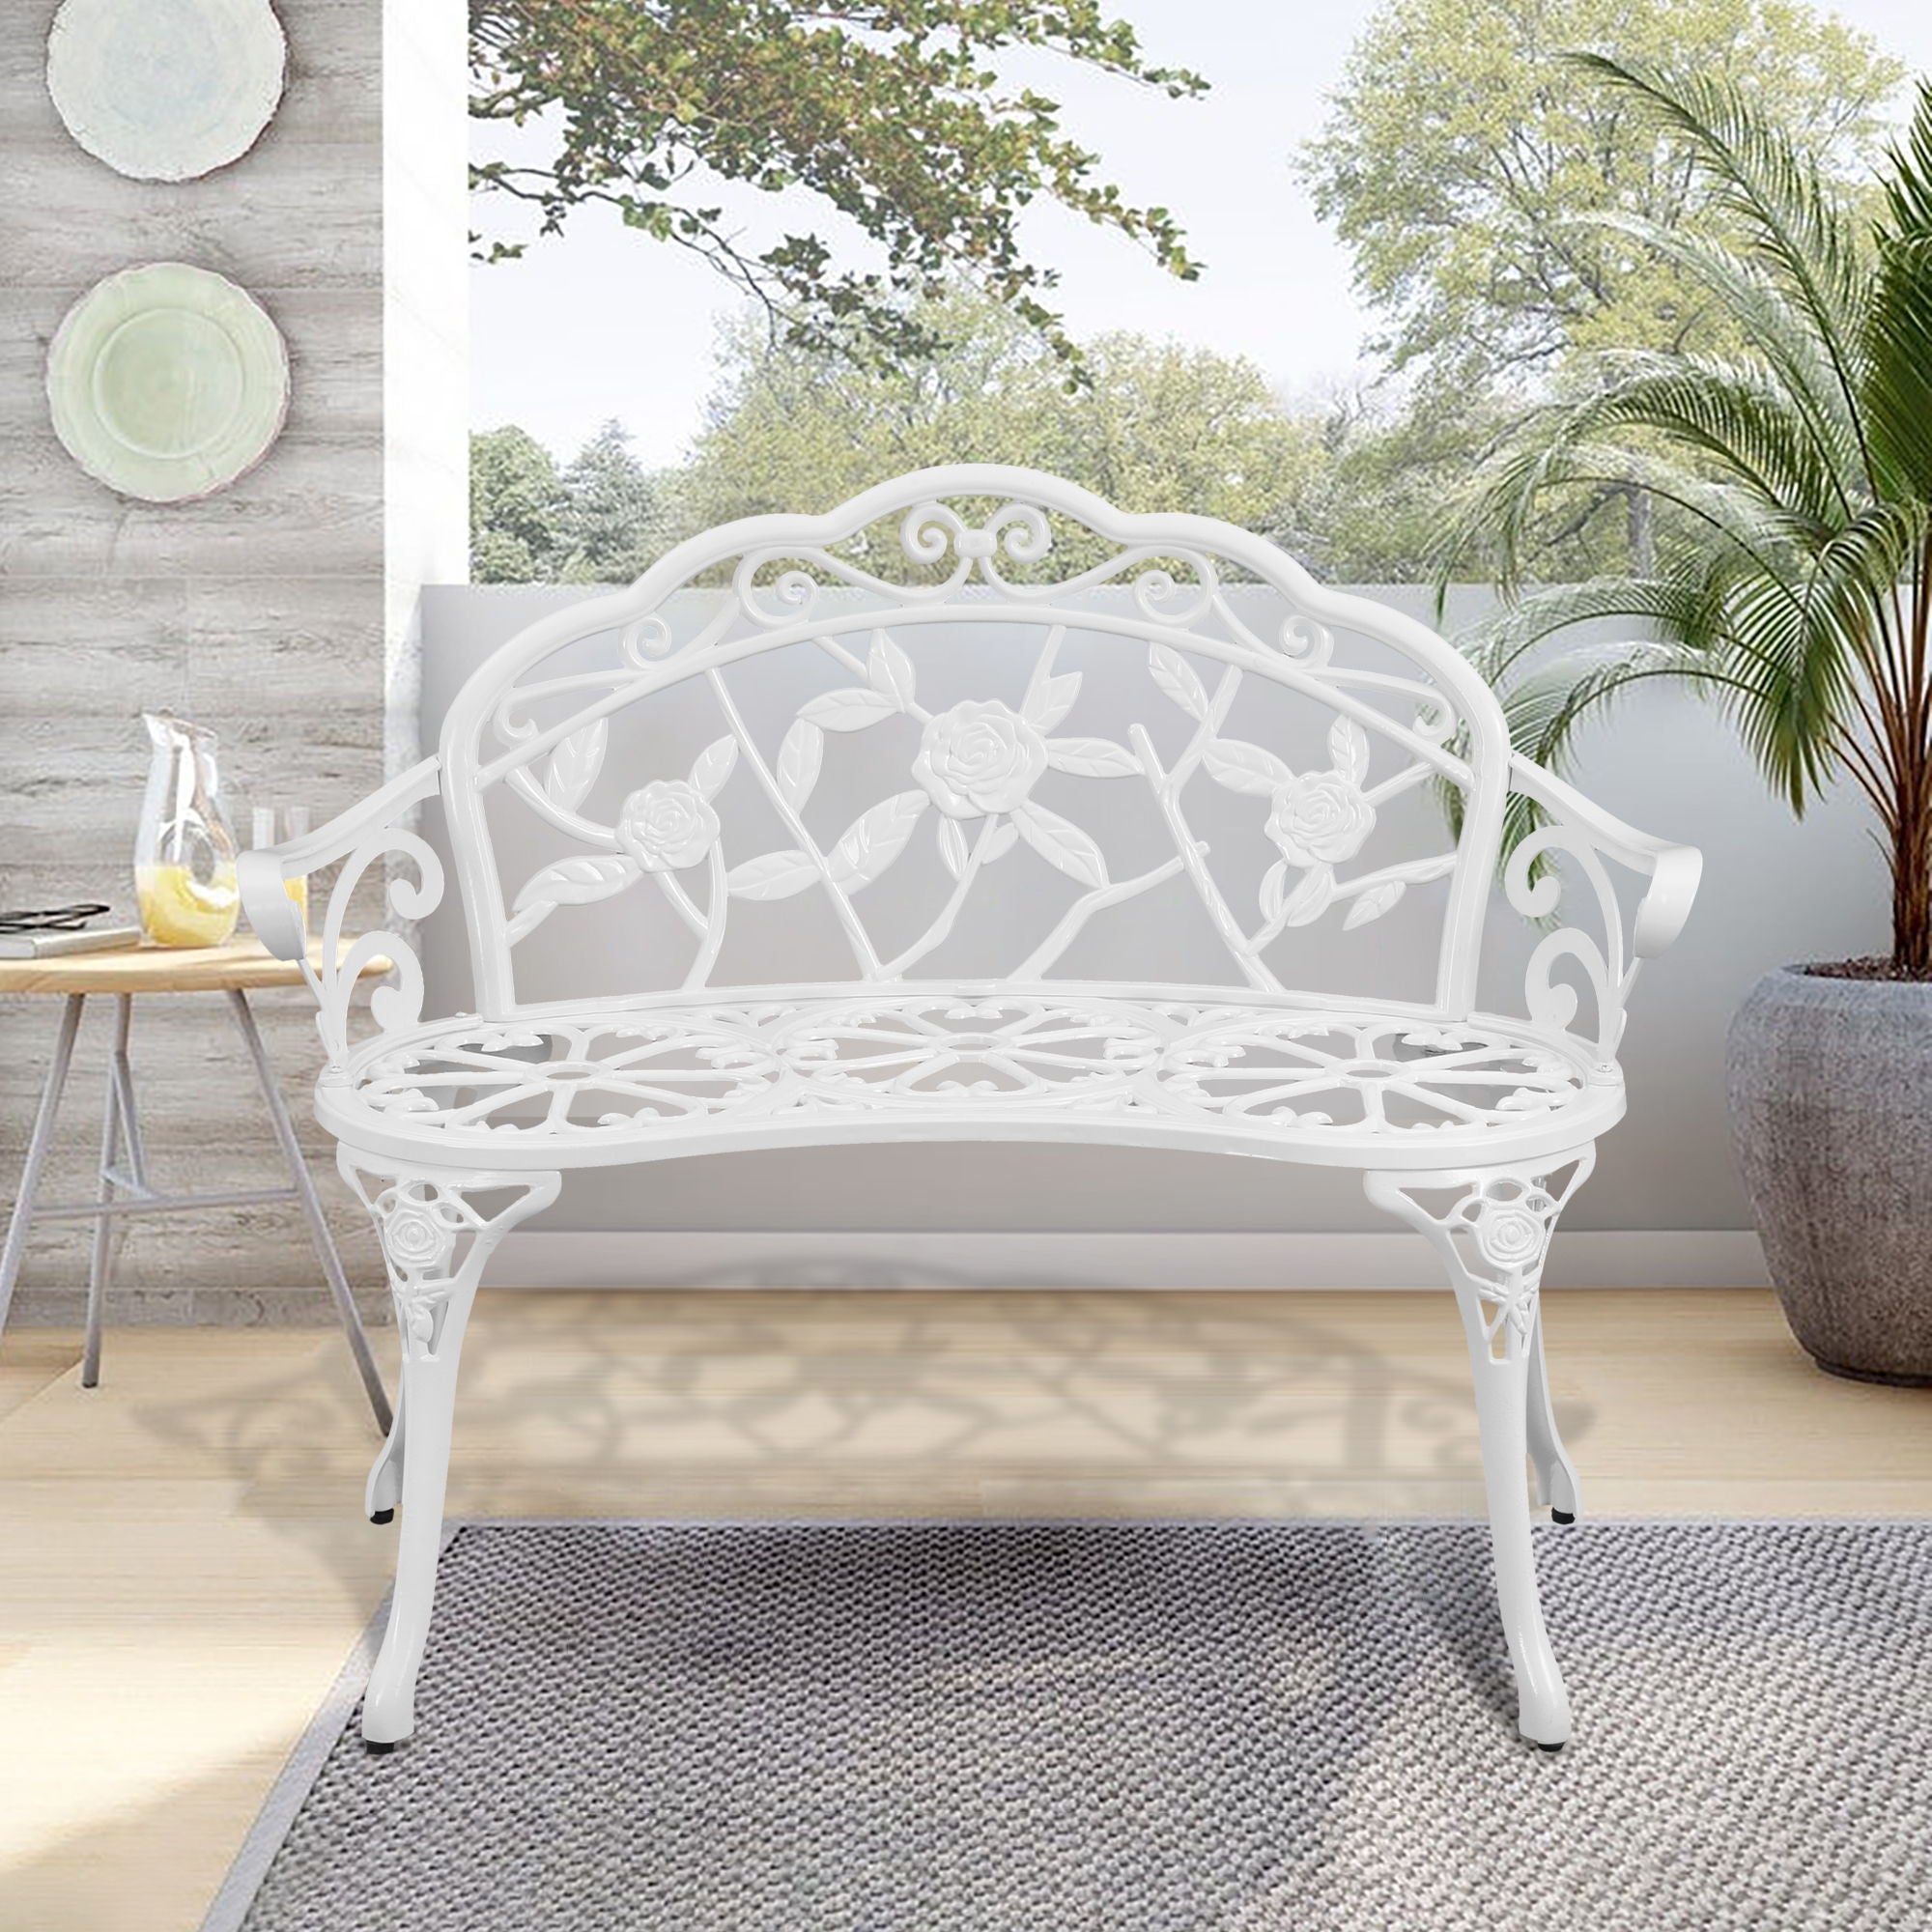 Patio Outdoor Bench, White Cast-Aluminum Garden Benches Metal Loveseat Outdoor Furniture For Park Lawn Front Porch